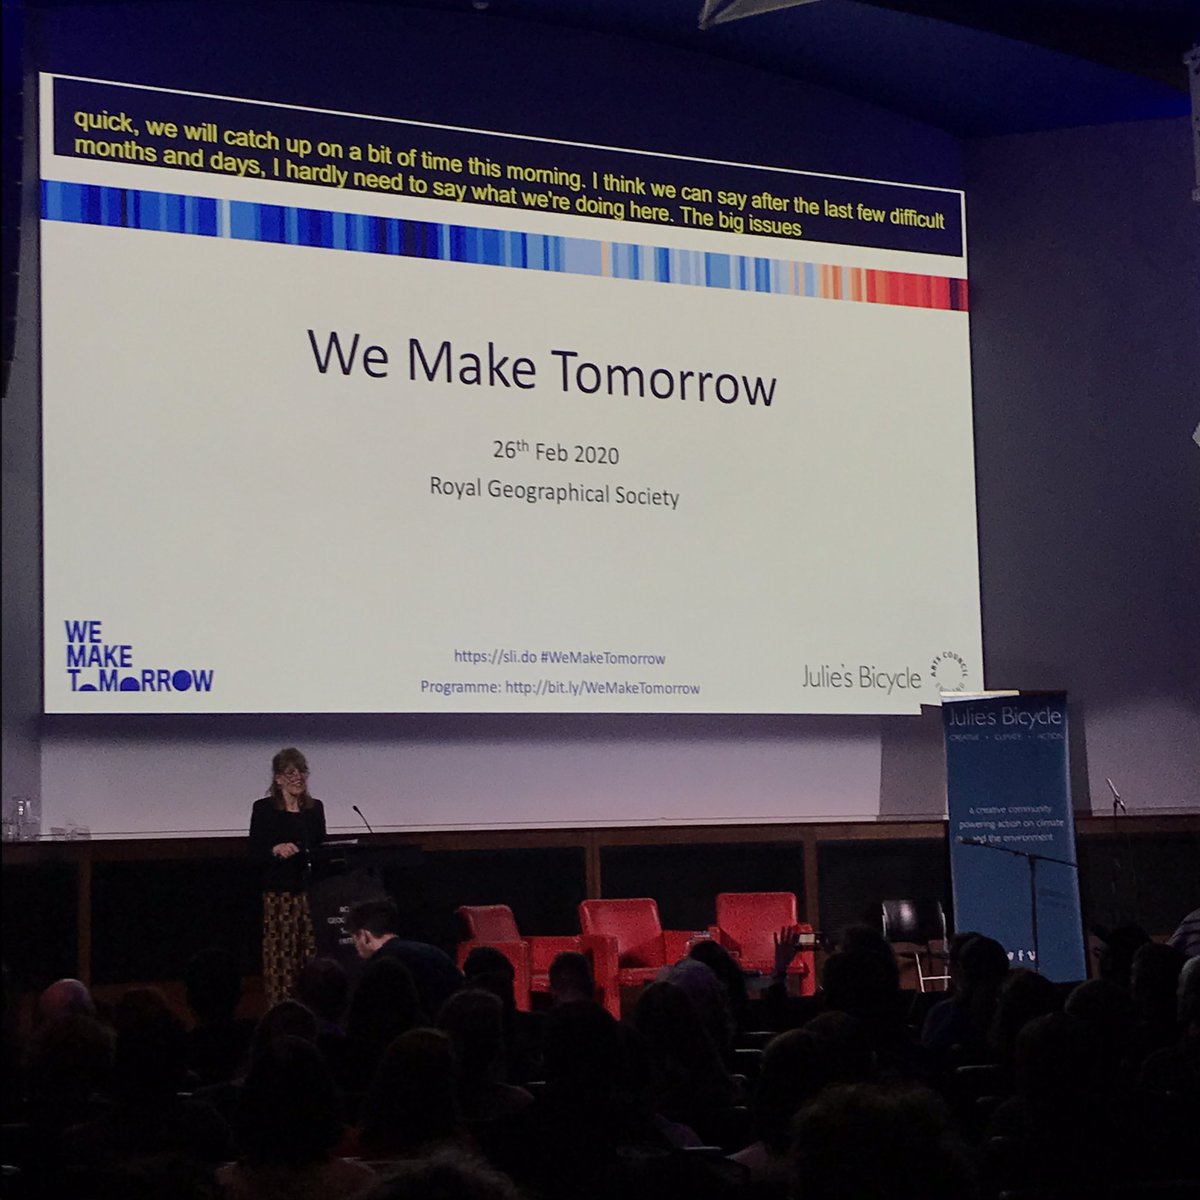 excited and full of anticipation for the @JuliesBicycle and @ace_national conference #WeMakeTomorrow (today) - sold out, full of people ready to connect culture to climate change and to social justice